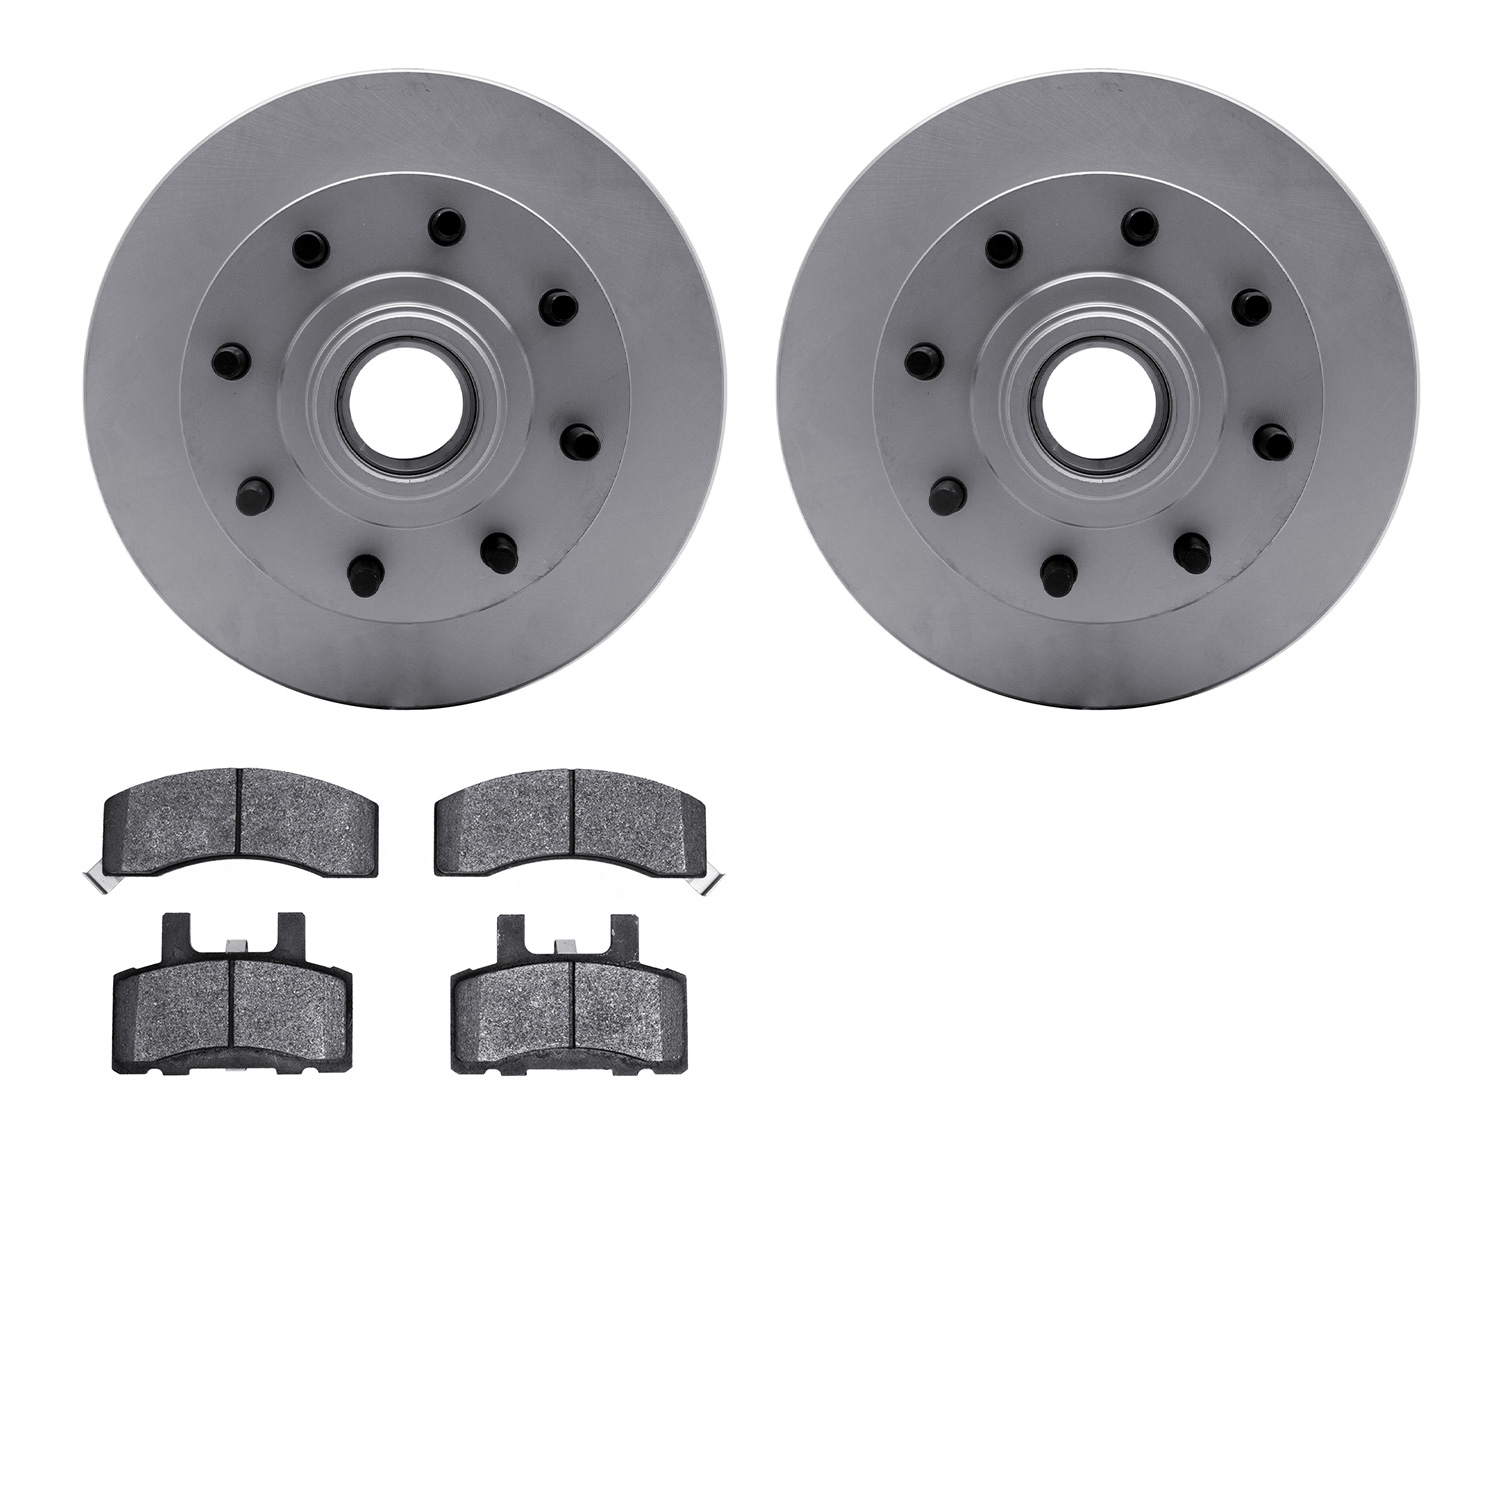 4402-48009 Geospec Brake Rotors with Ultimate-Duty Brake Pads Kit, 1992-2002 GM, Position: Front